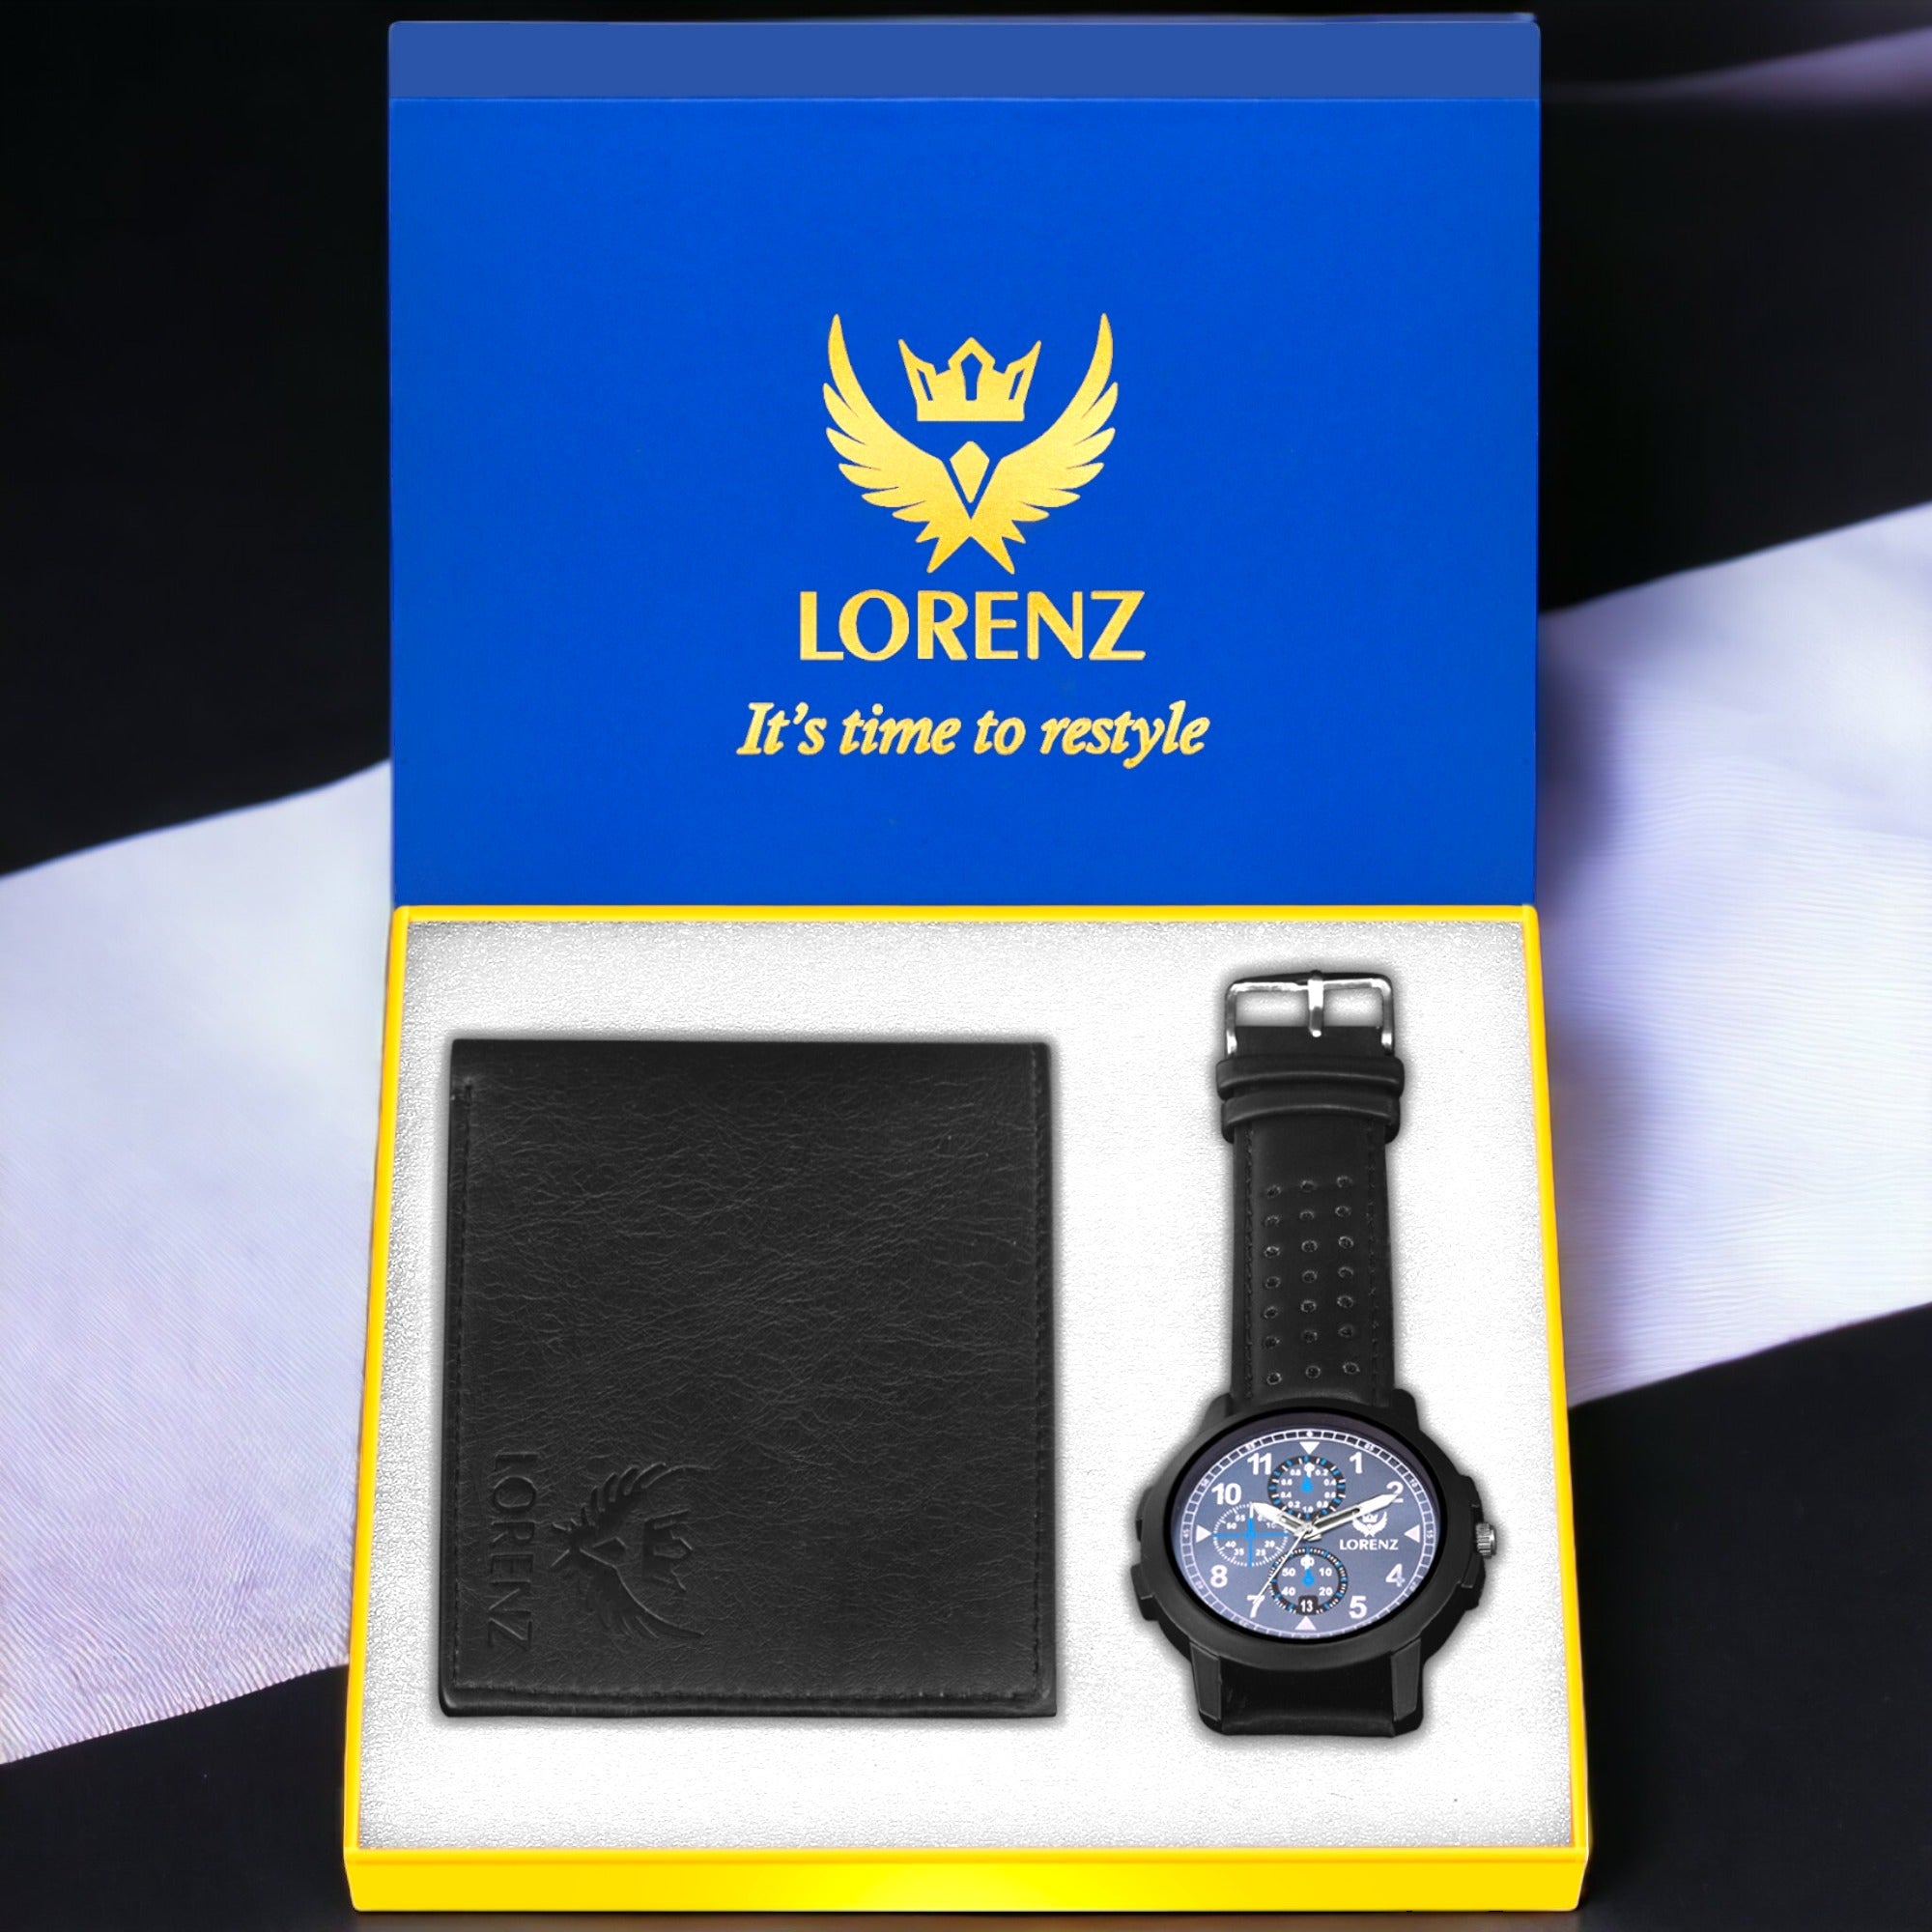 Lorenz CM-2018WL-01 Combo of Men's Blue Dial Analog Watch and Black Wallet